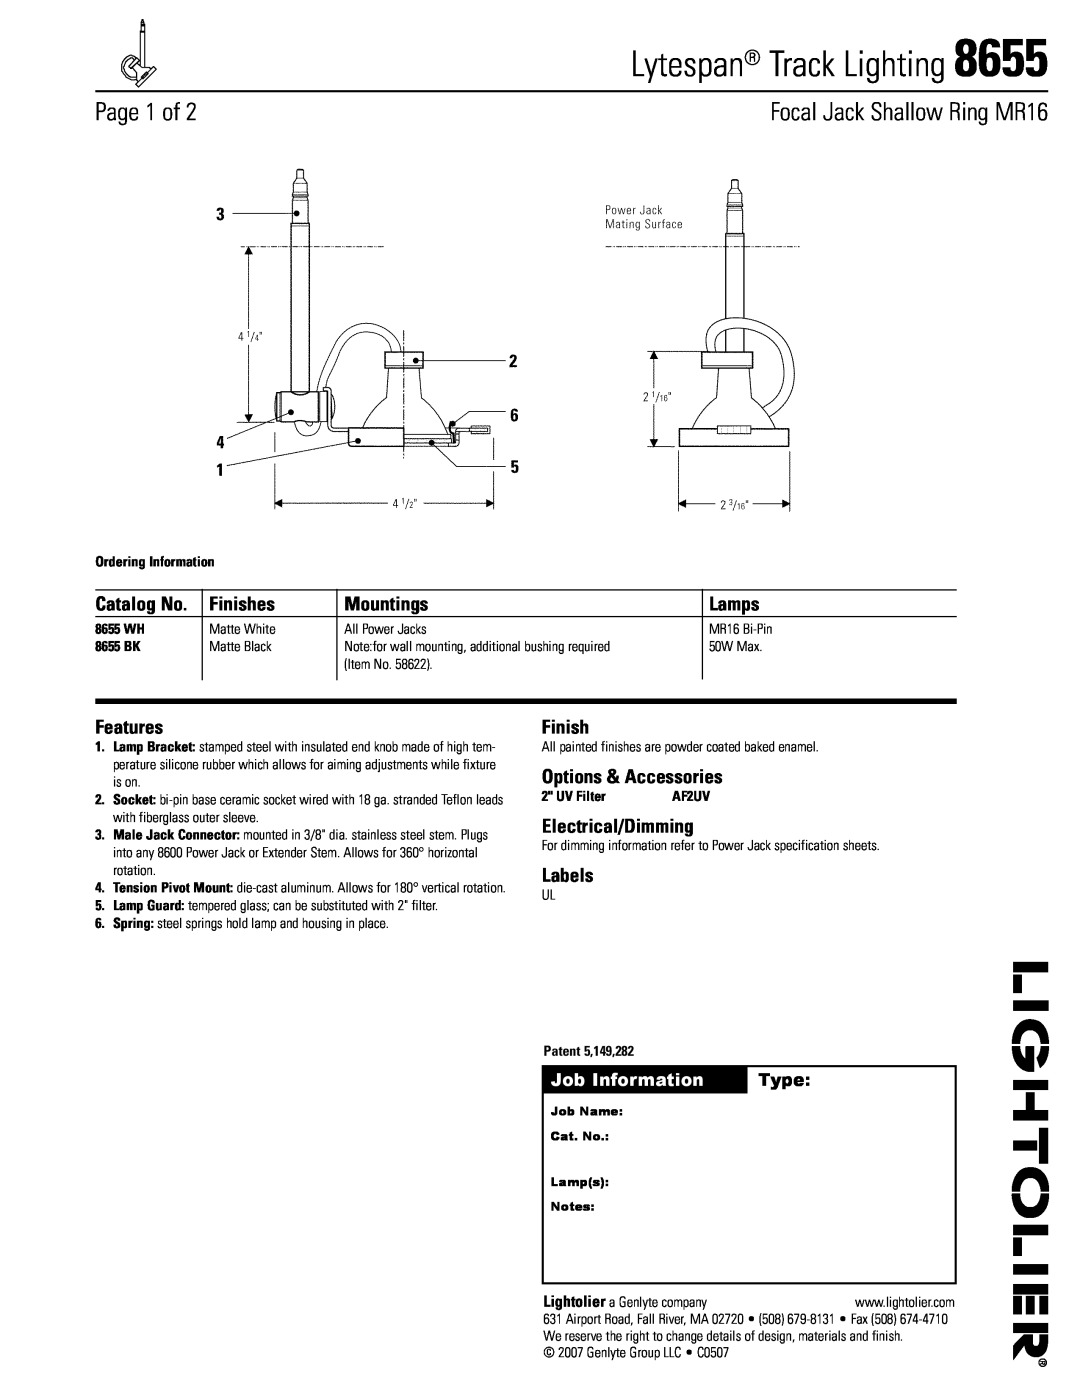 Lightolier 8655 specifications Lytespan Track Lighting, Page 1 of, Focal Jack Shallow Ring MR16, Finishes, Mountings, Type 